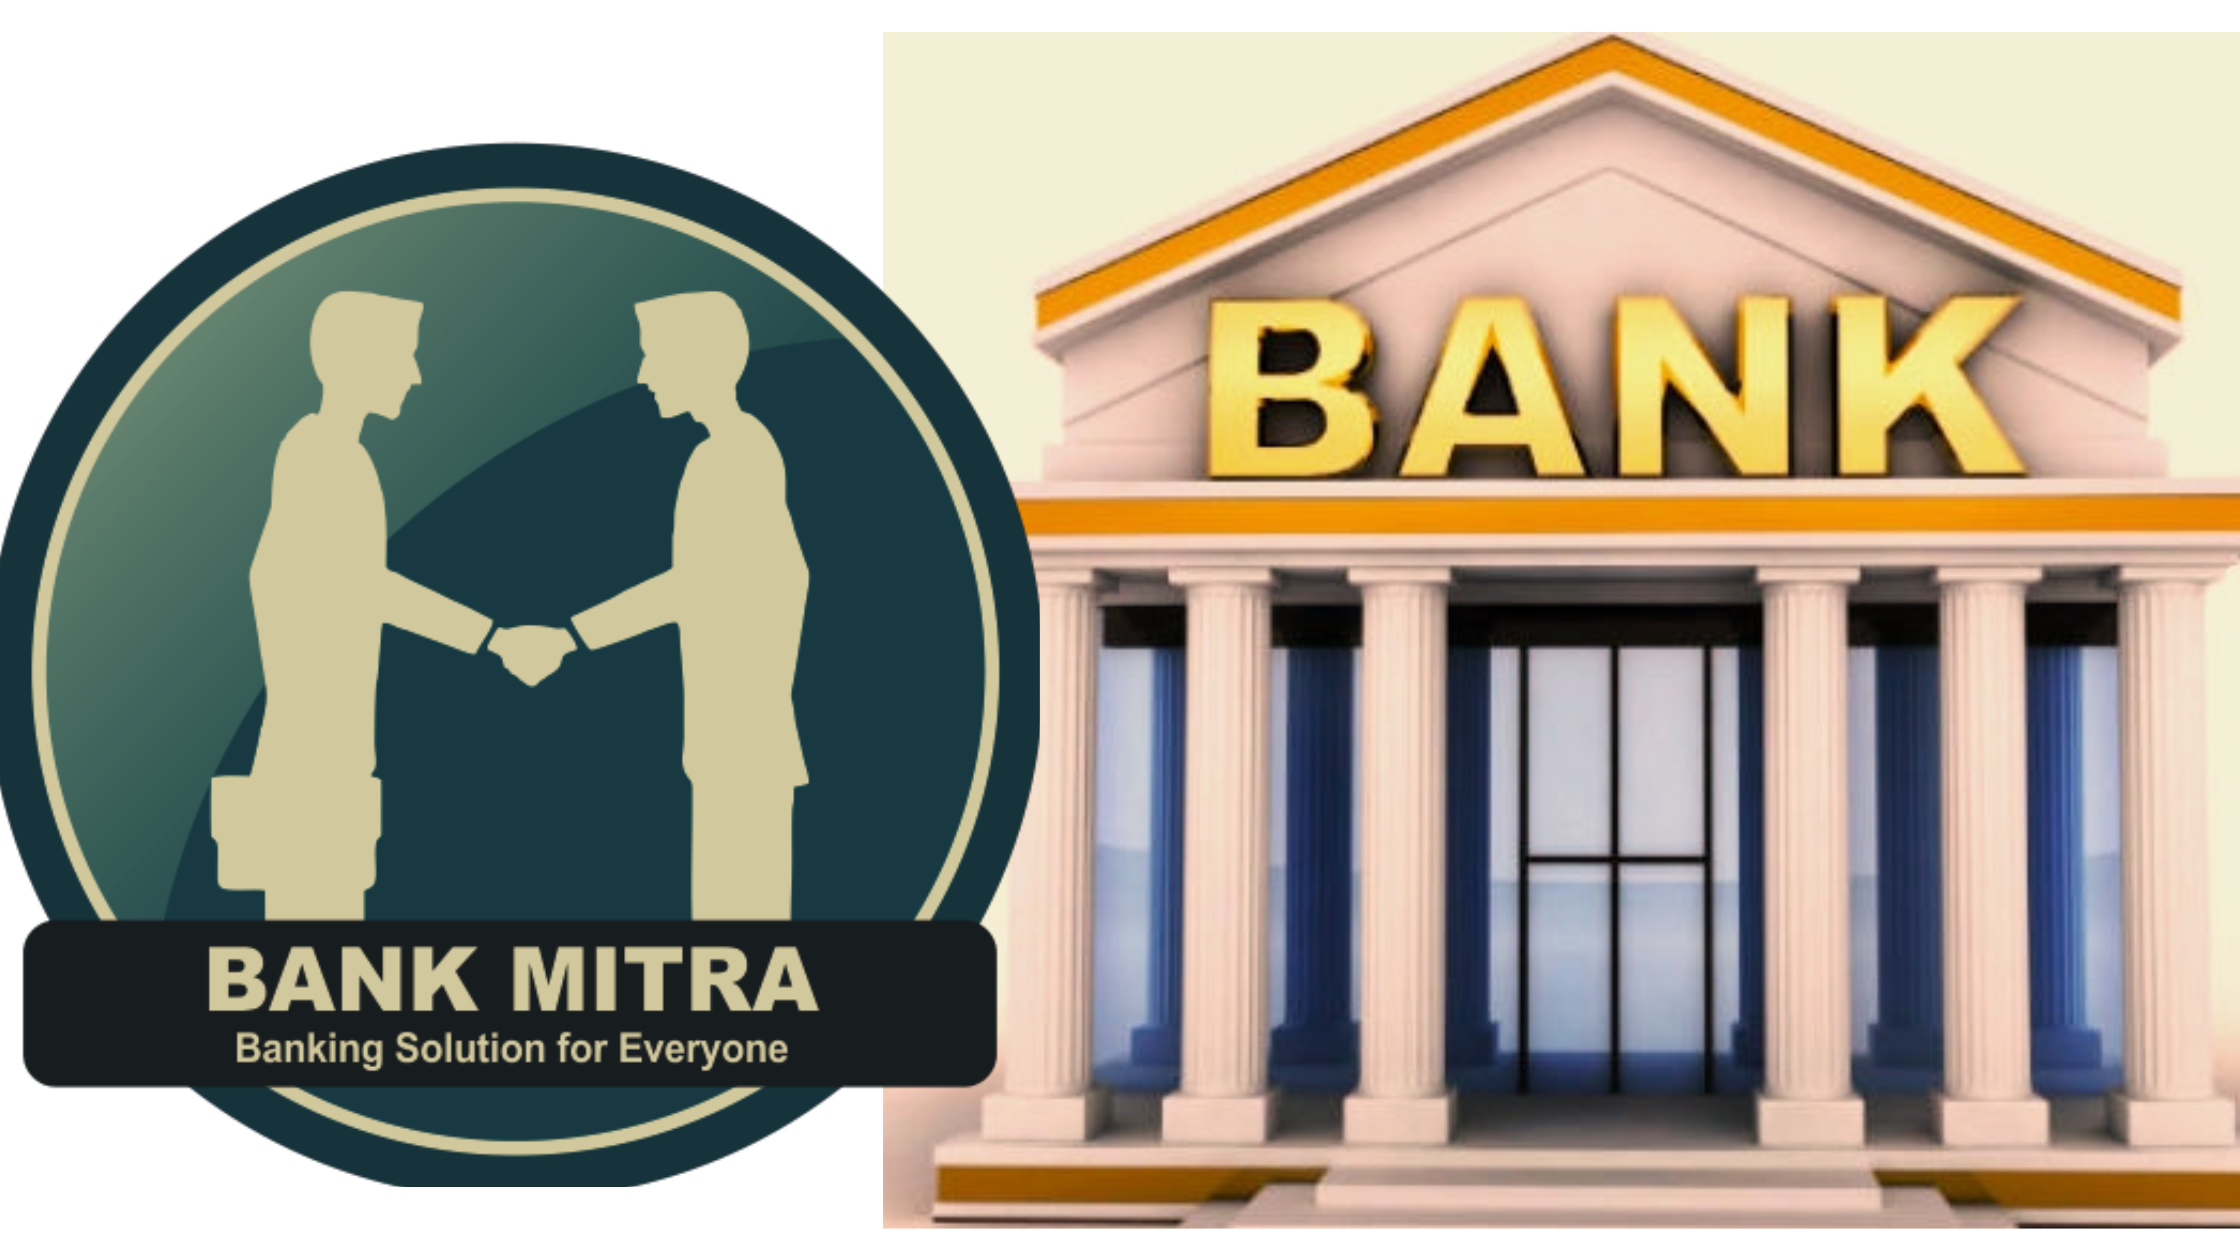 With 'Bank Mitra' you can easily earn Rs 5,000 every month